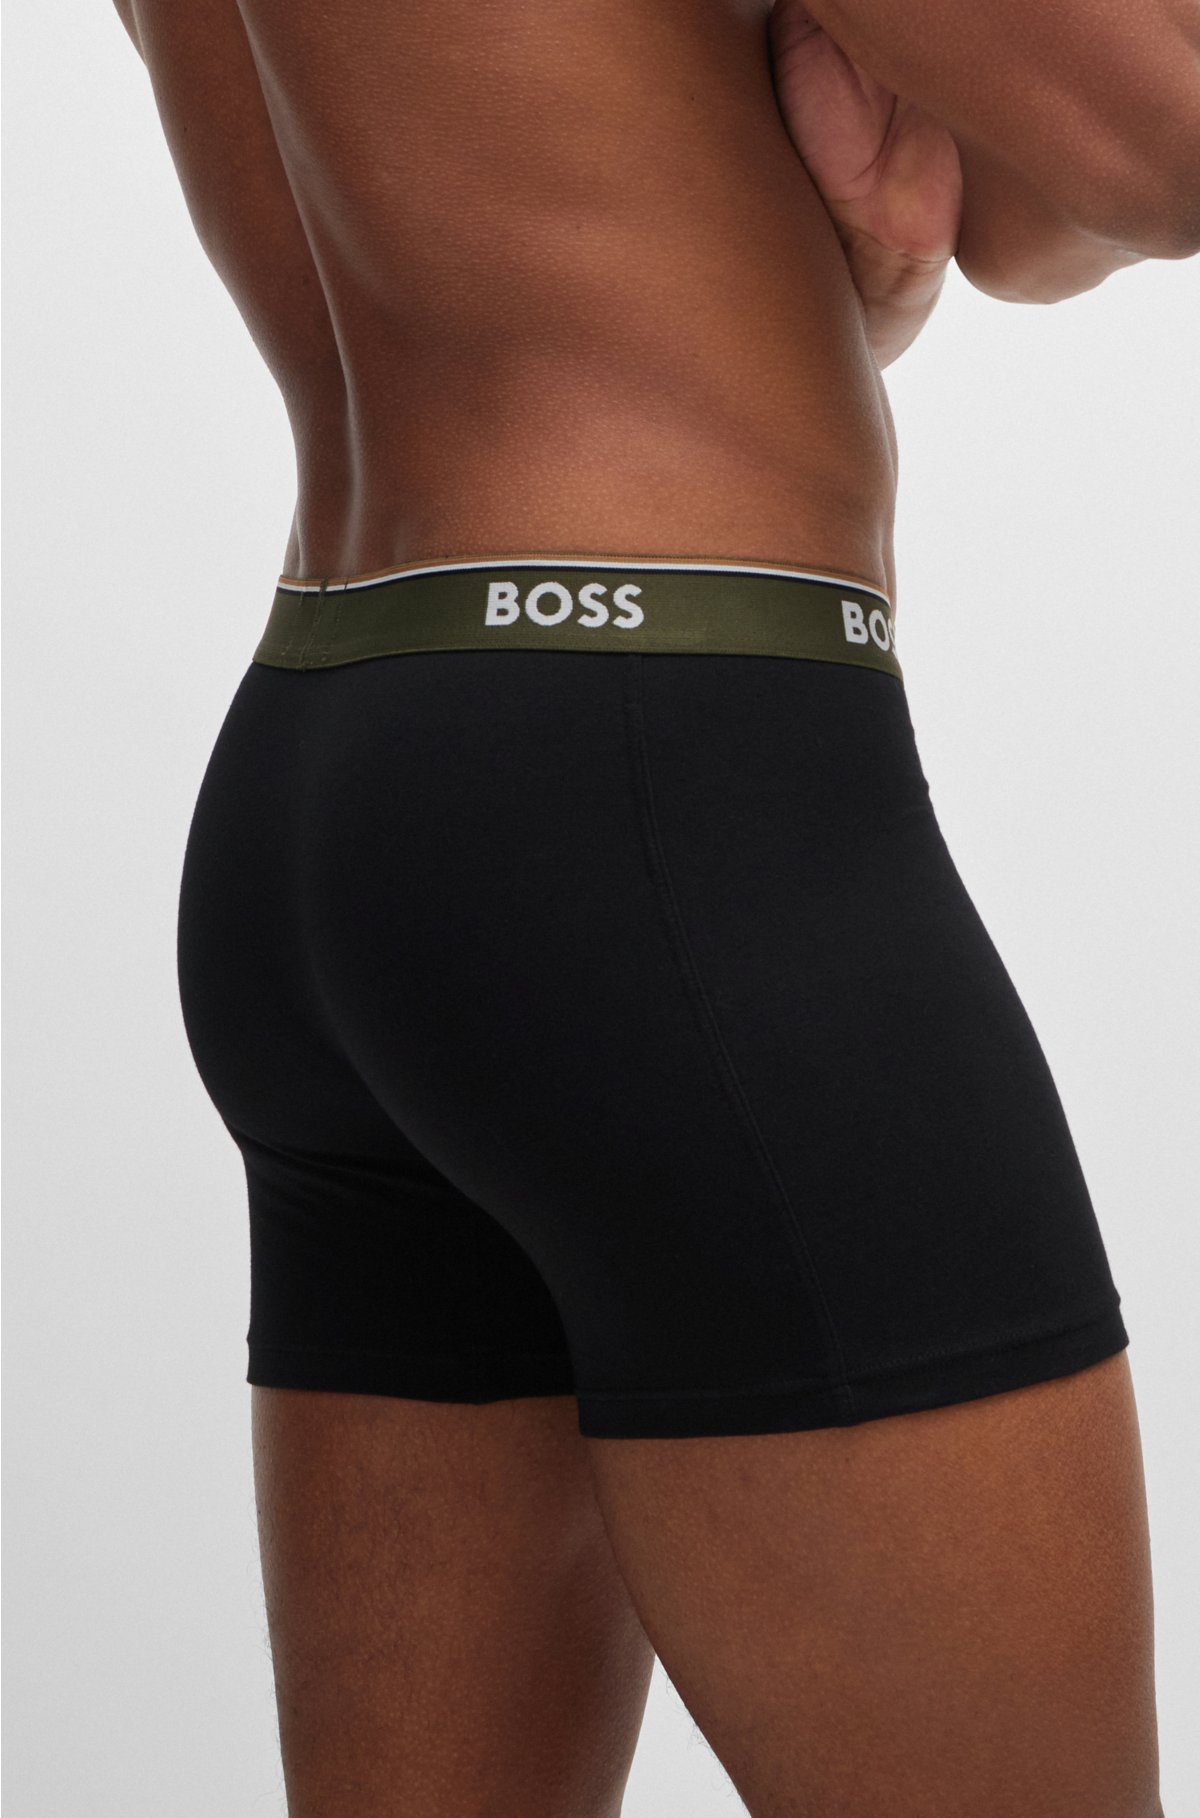 HUGO BOSS COTTON STRETCH BOXER BRIEF 3 PACK – Miltons - The Store for Men